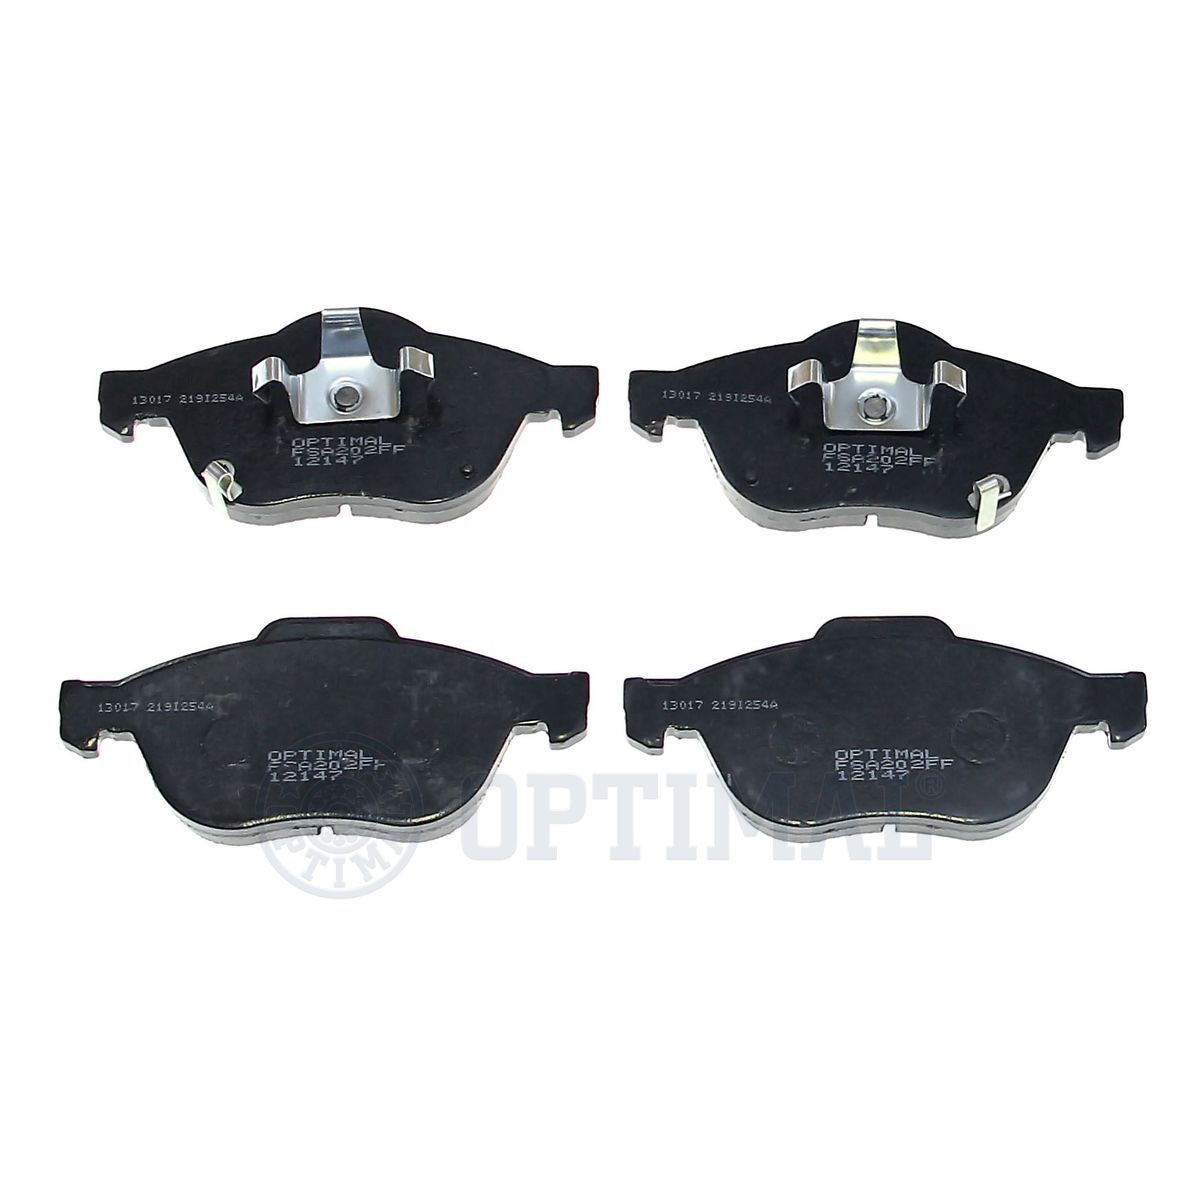 OPTIMAL BP-12147 Brake pad set Front Axle, with acoustic wear warning